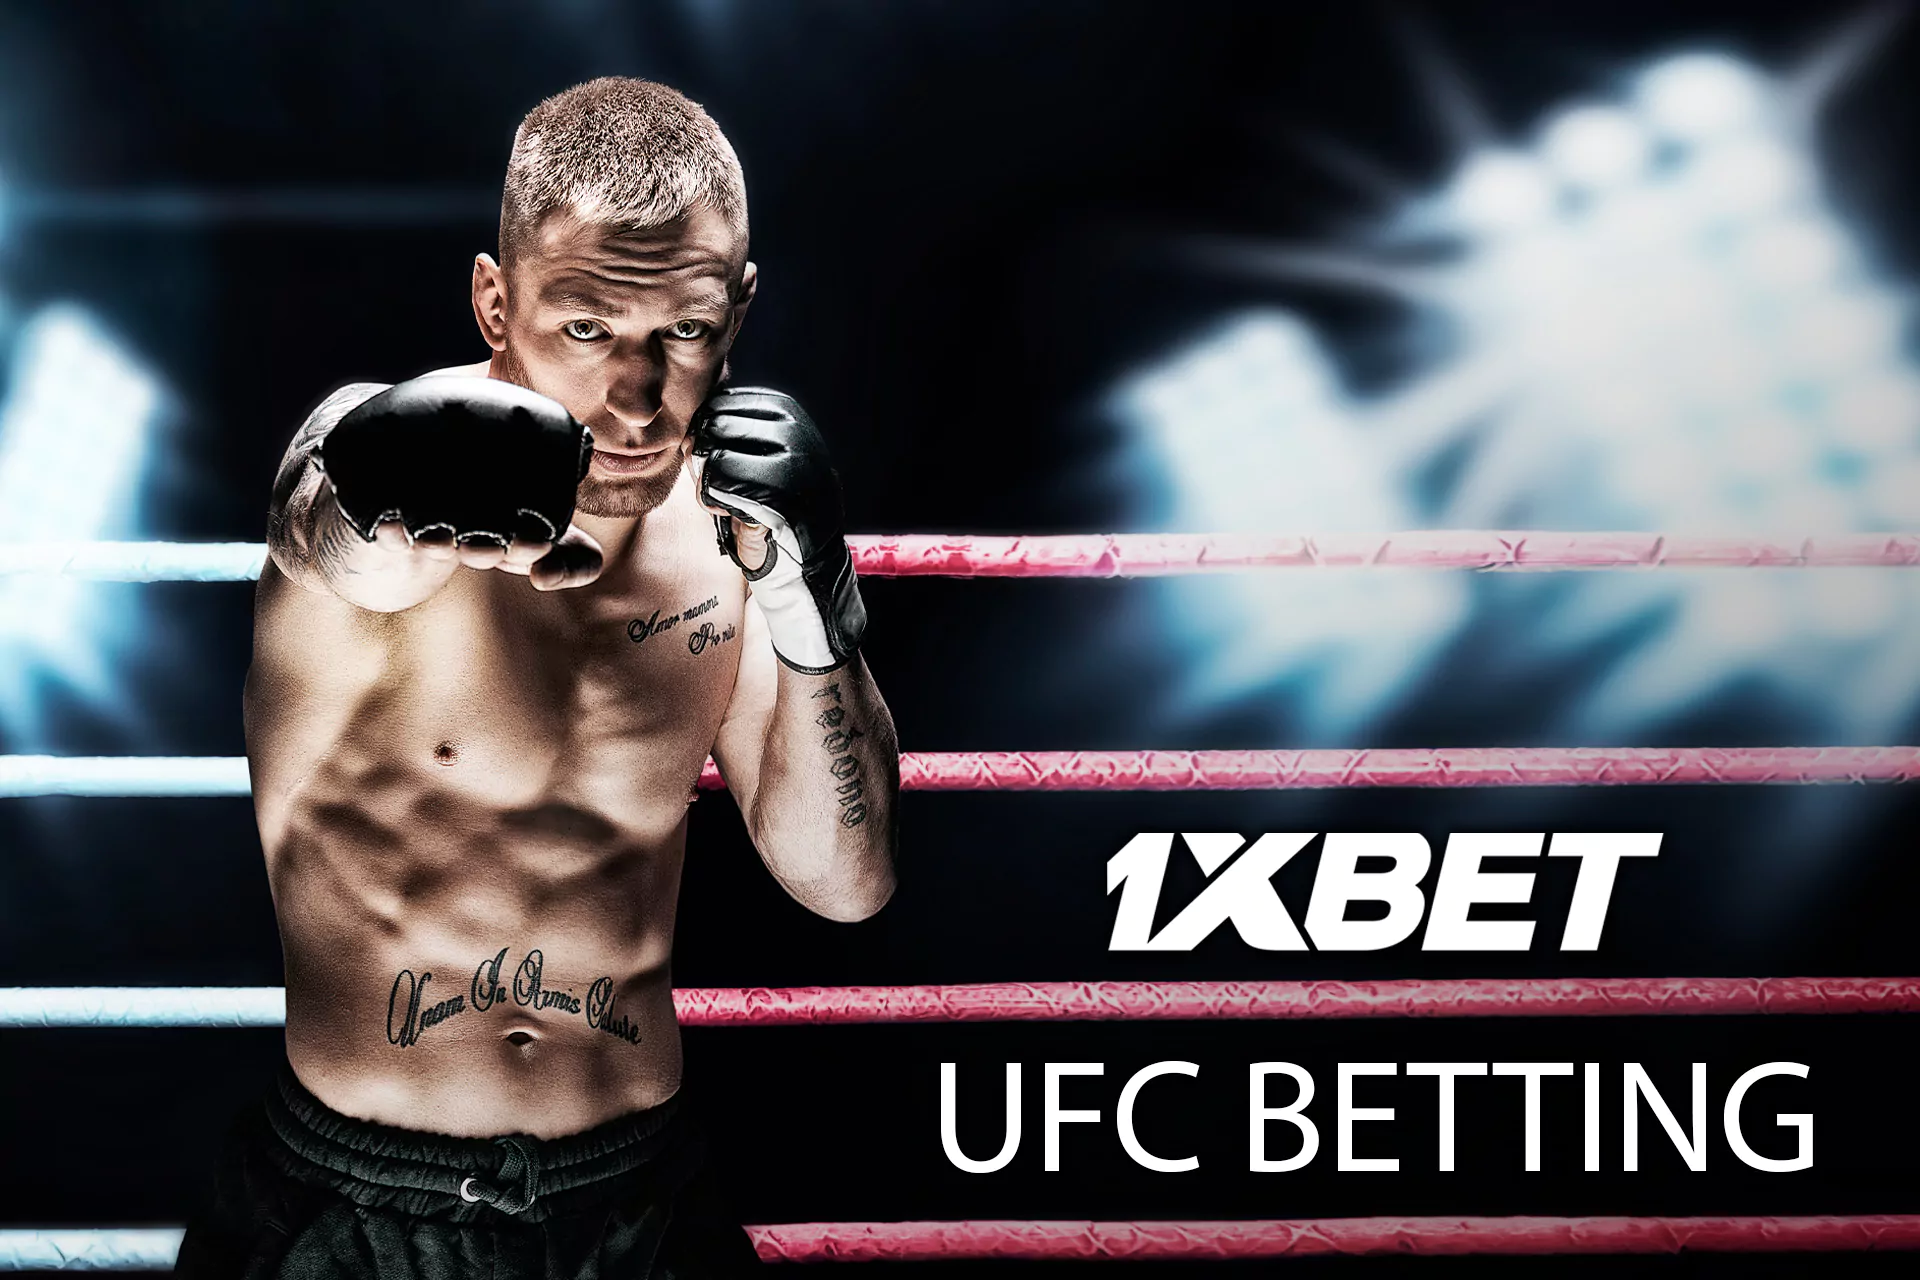 UFC betting is gaining popularity in India.